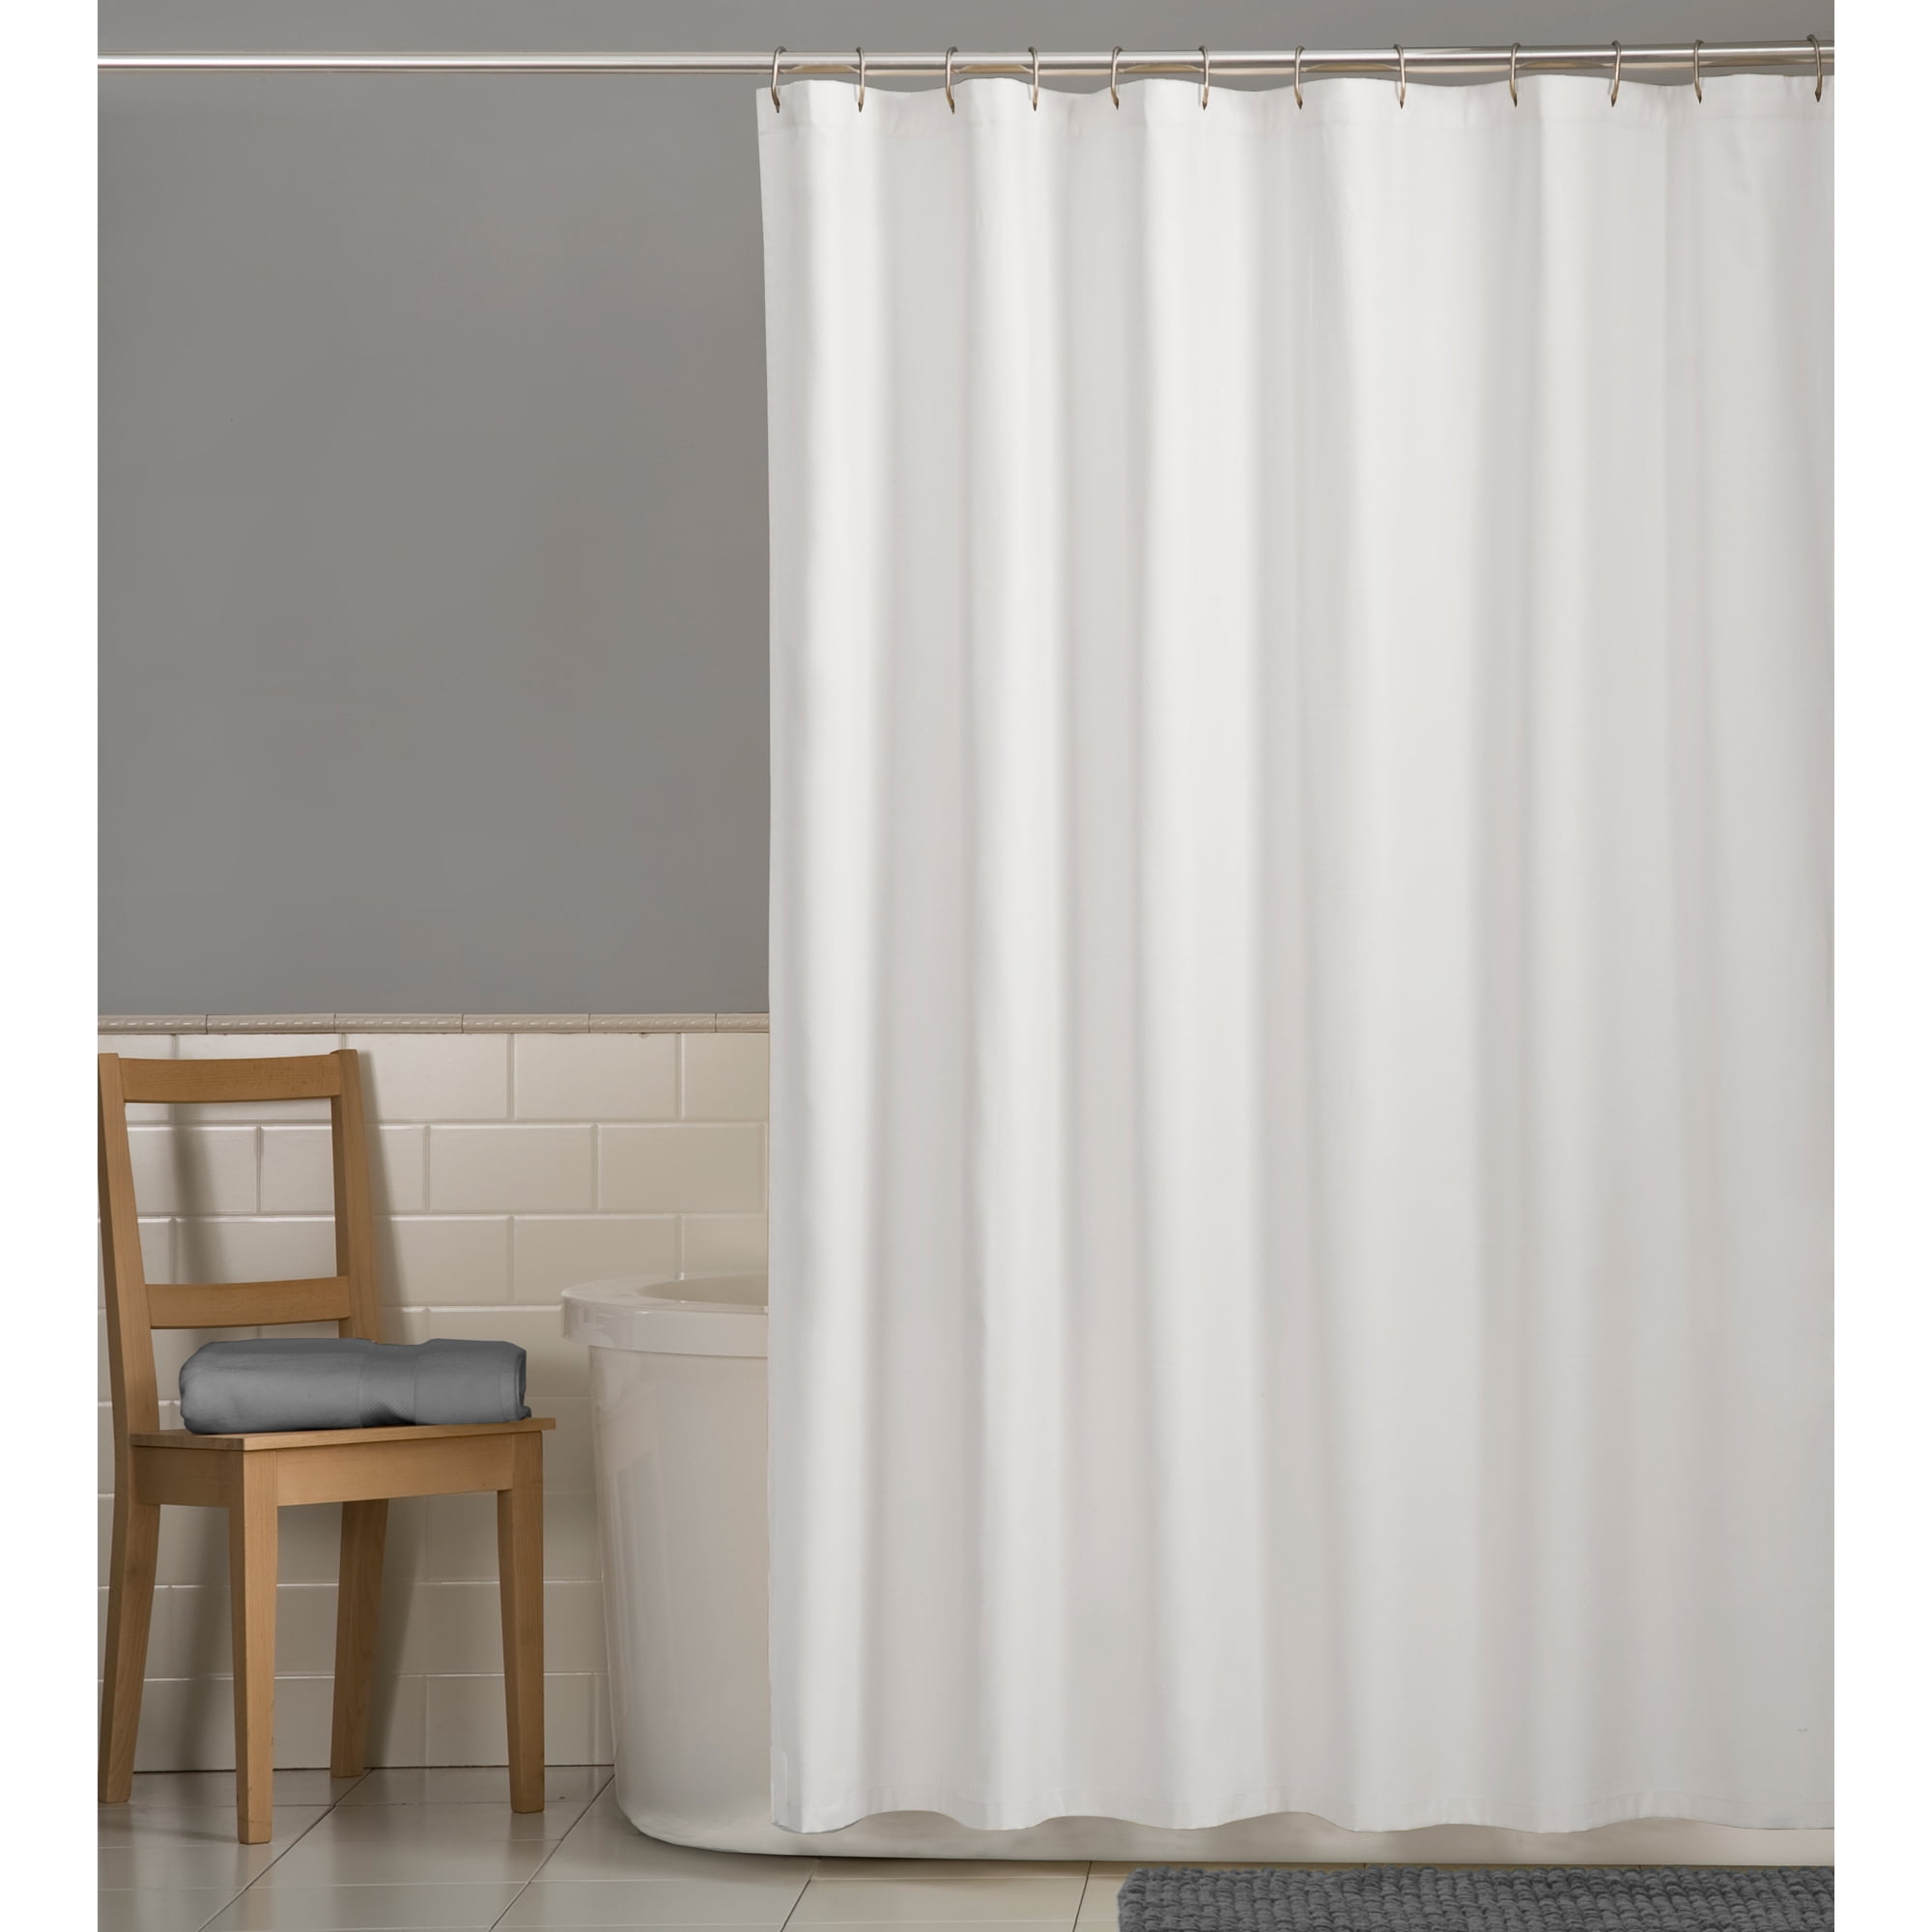 Bamboo Joint Waterproof Bathroom Polyester Shower Curtain Liner Water Resistant 